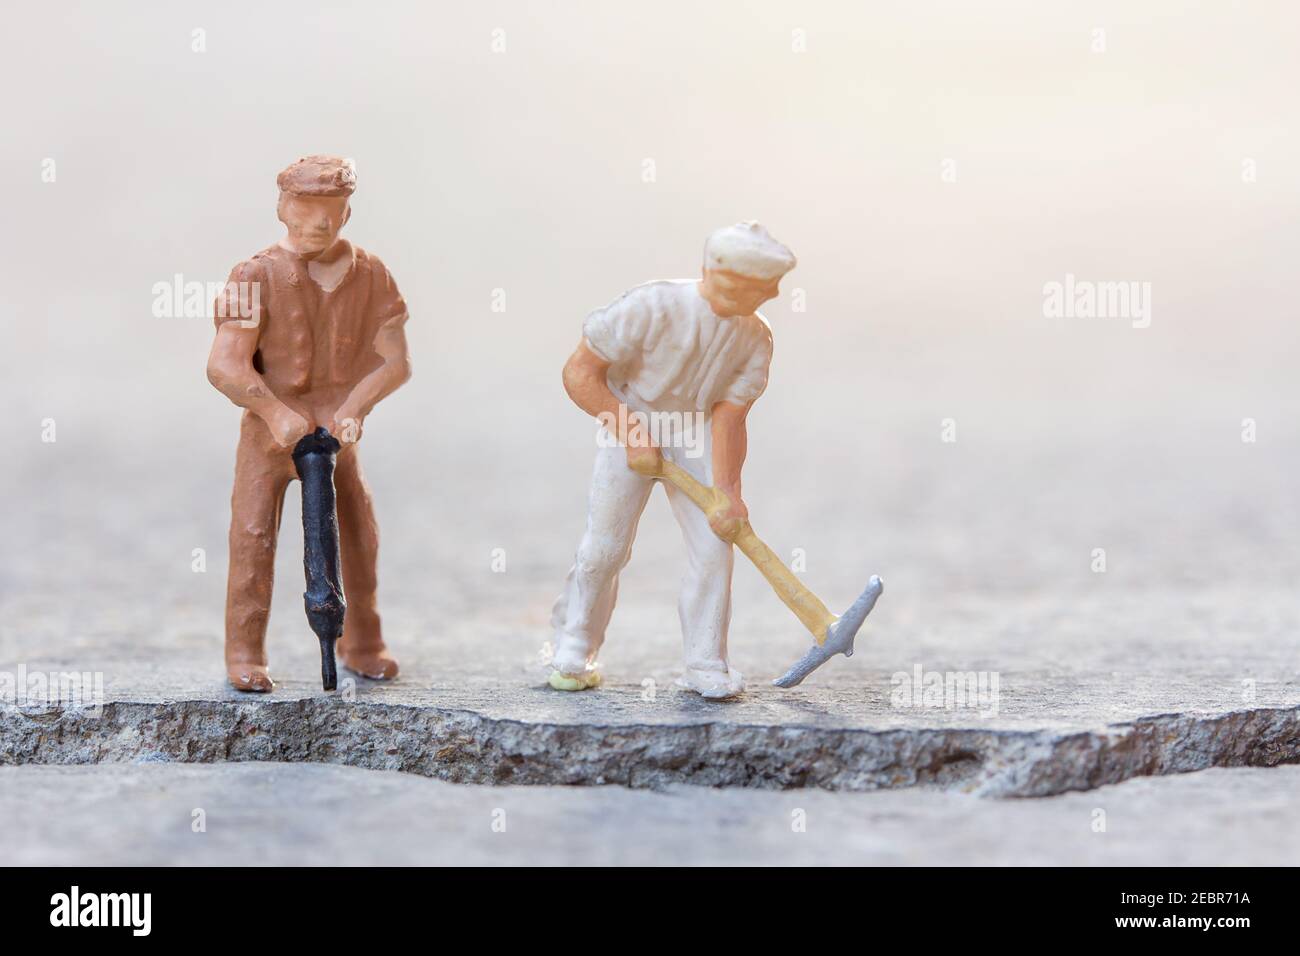 Miniature people- Figures construction worker, is working on a cracked area with blurred background and sunlight.Business and construction concept. Stock Photo